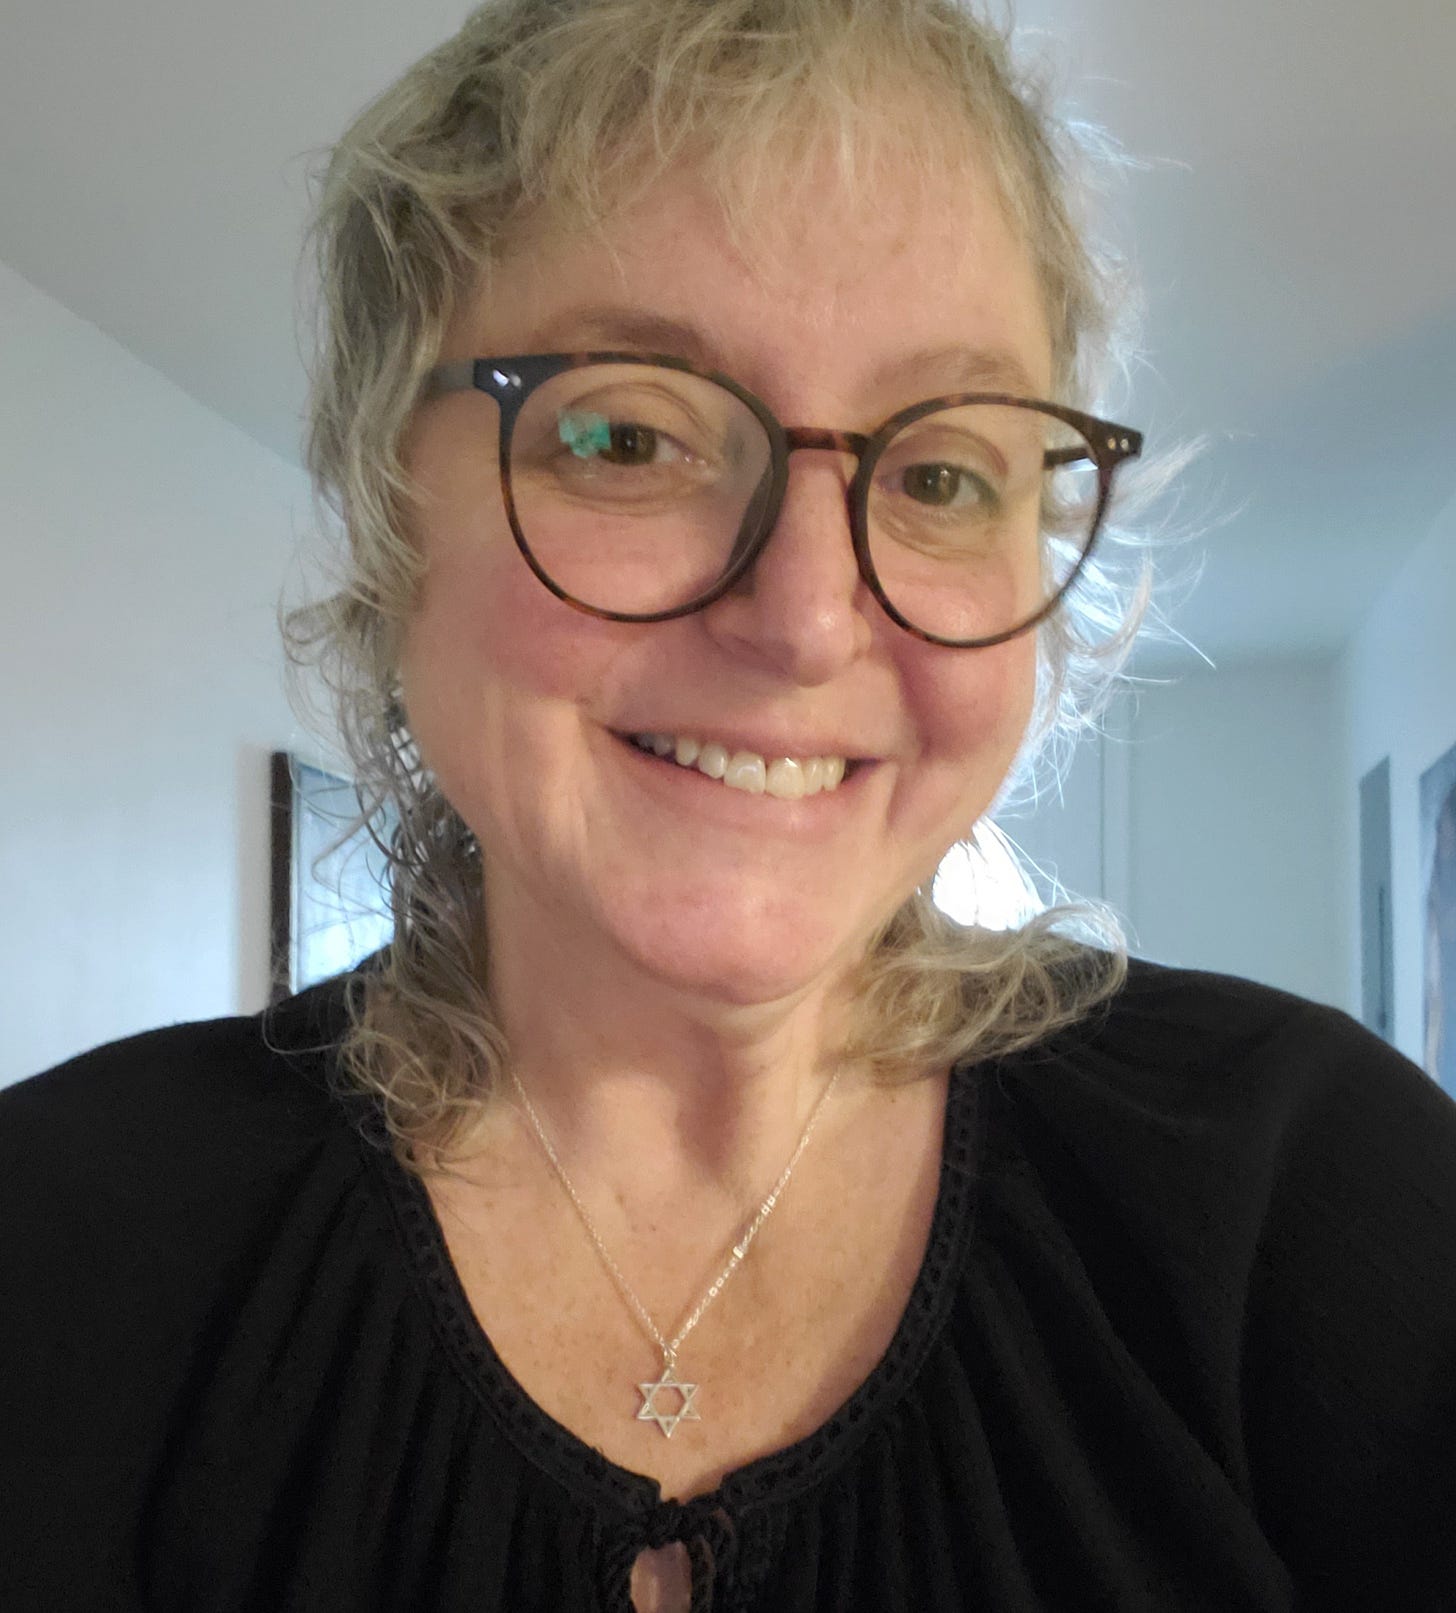 A white woman with gray hair and round glasses sporting a Jewish star necklace. 